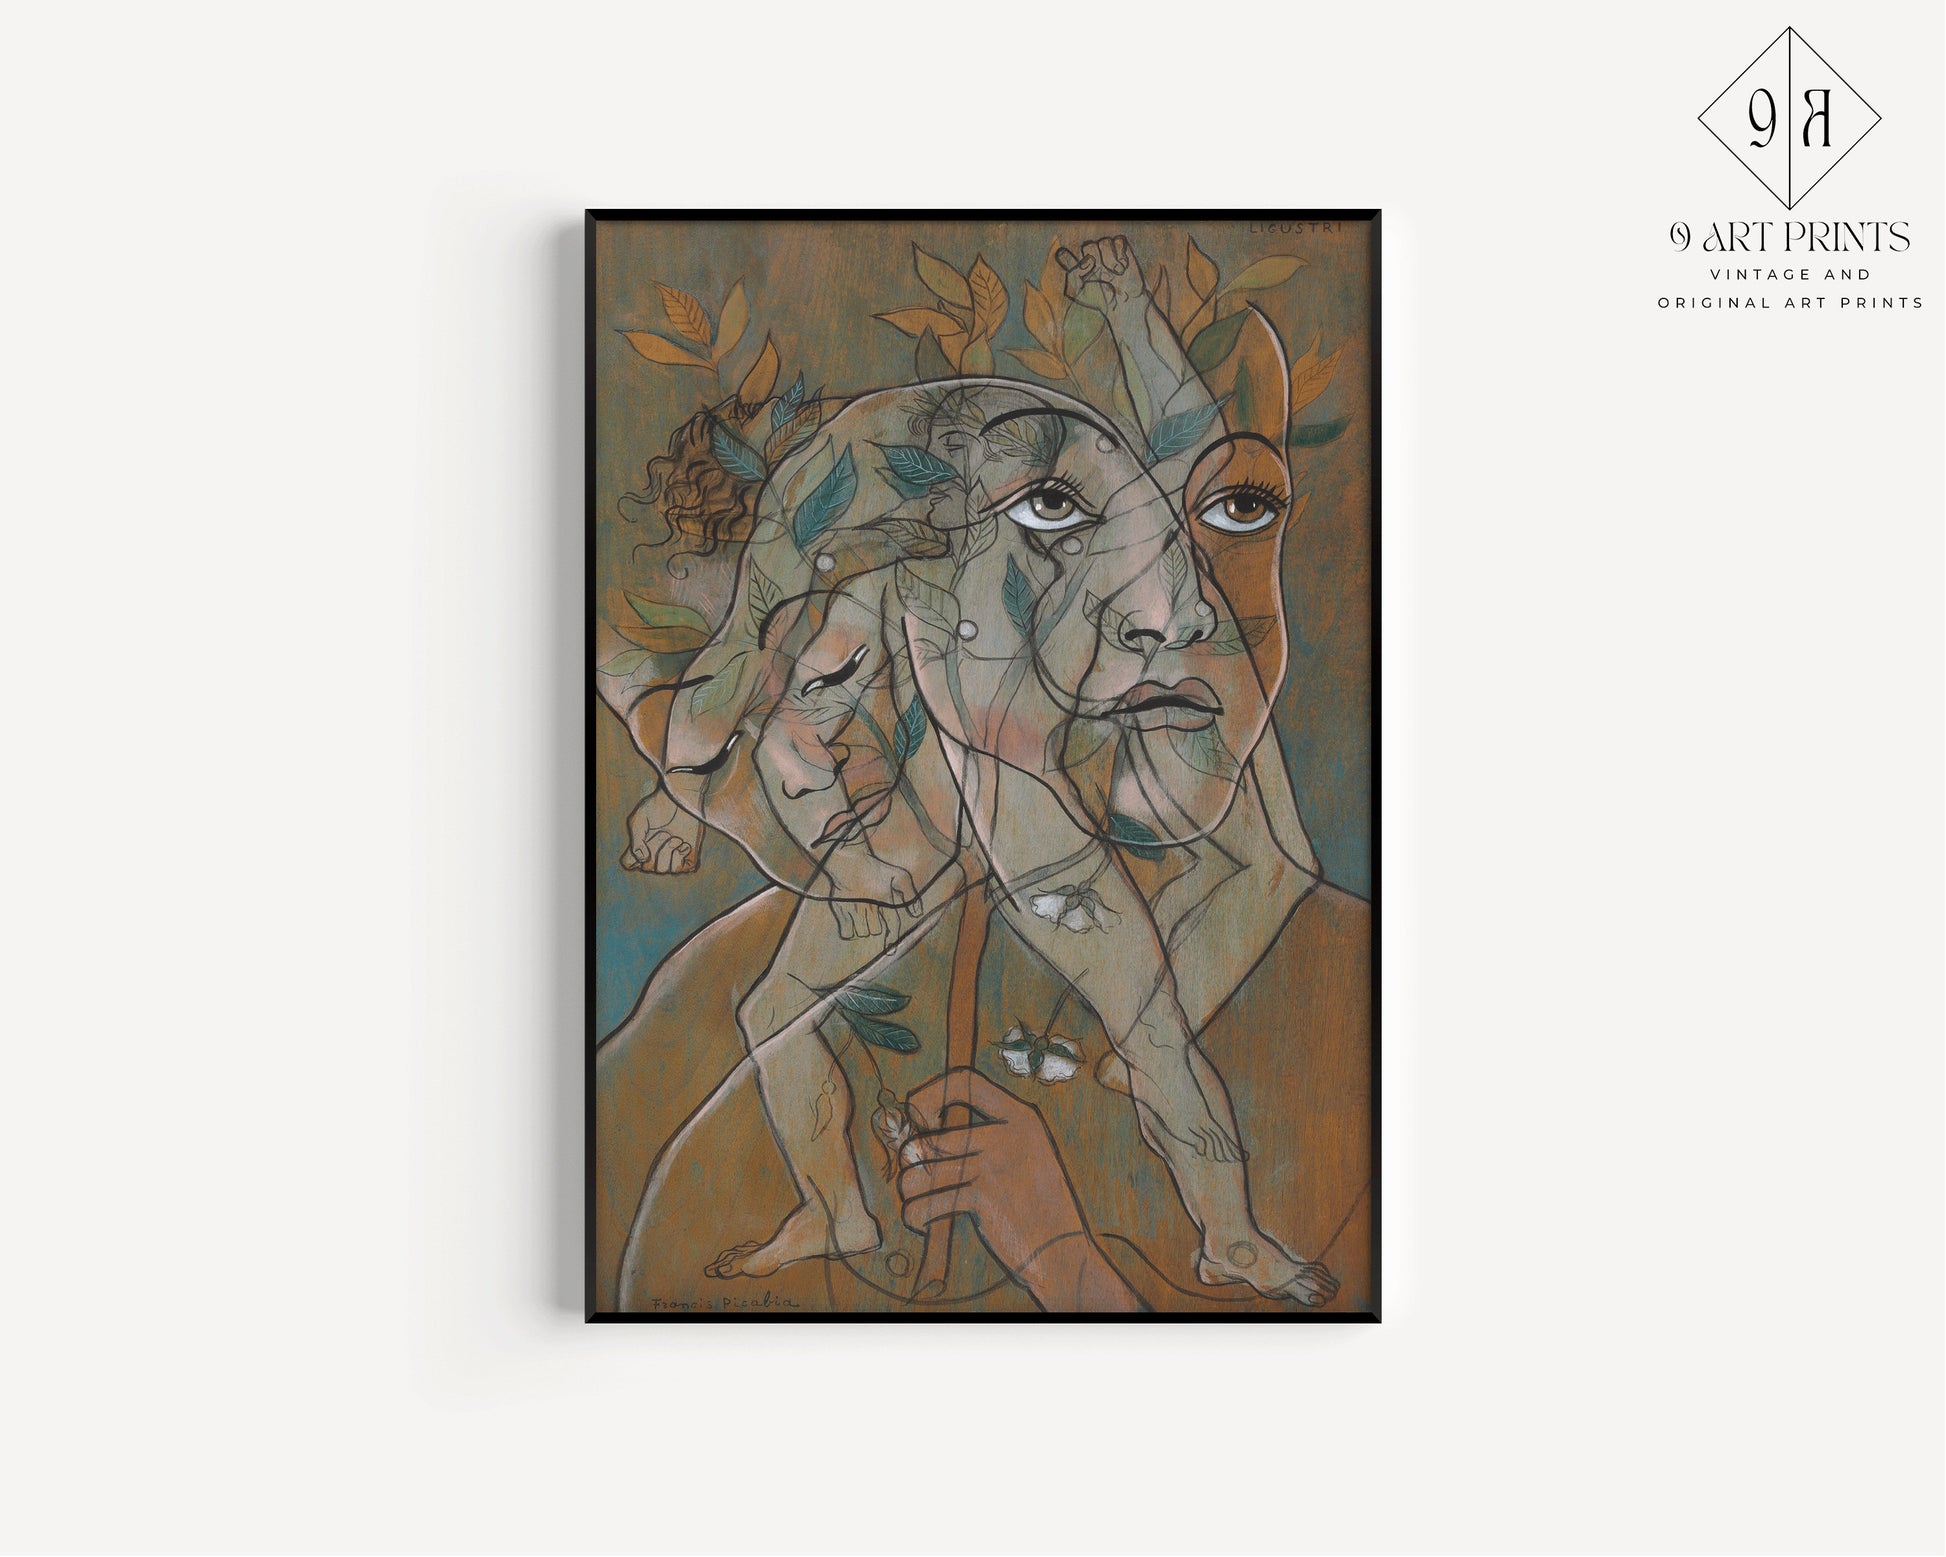 Framed Francis Picabia Ligustri 1929 Famous Painting Art Print Exhibition Museum Poster Ready to Hang Home Office Decor Gift Idea